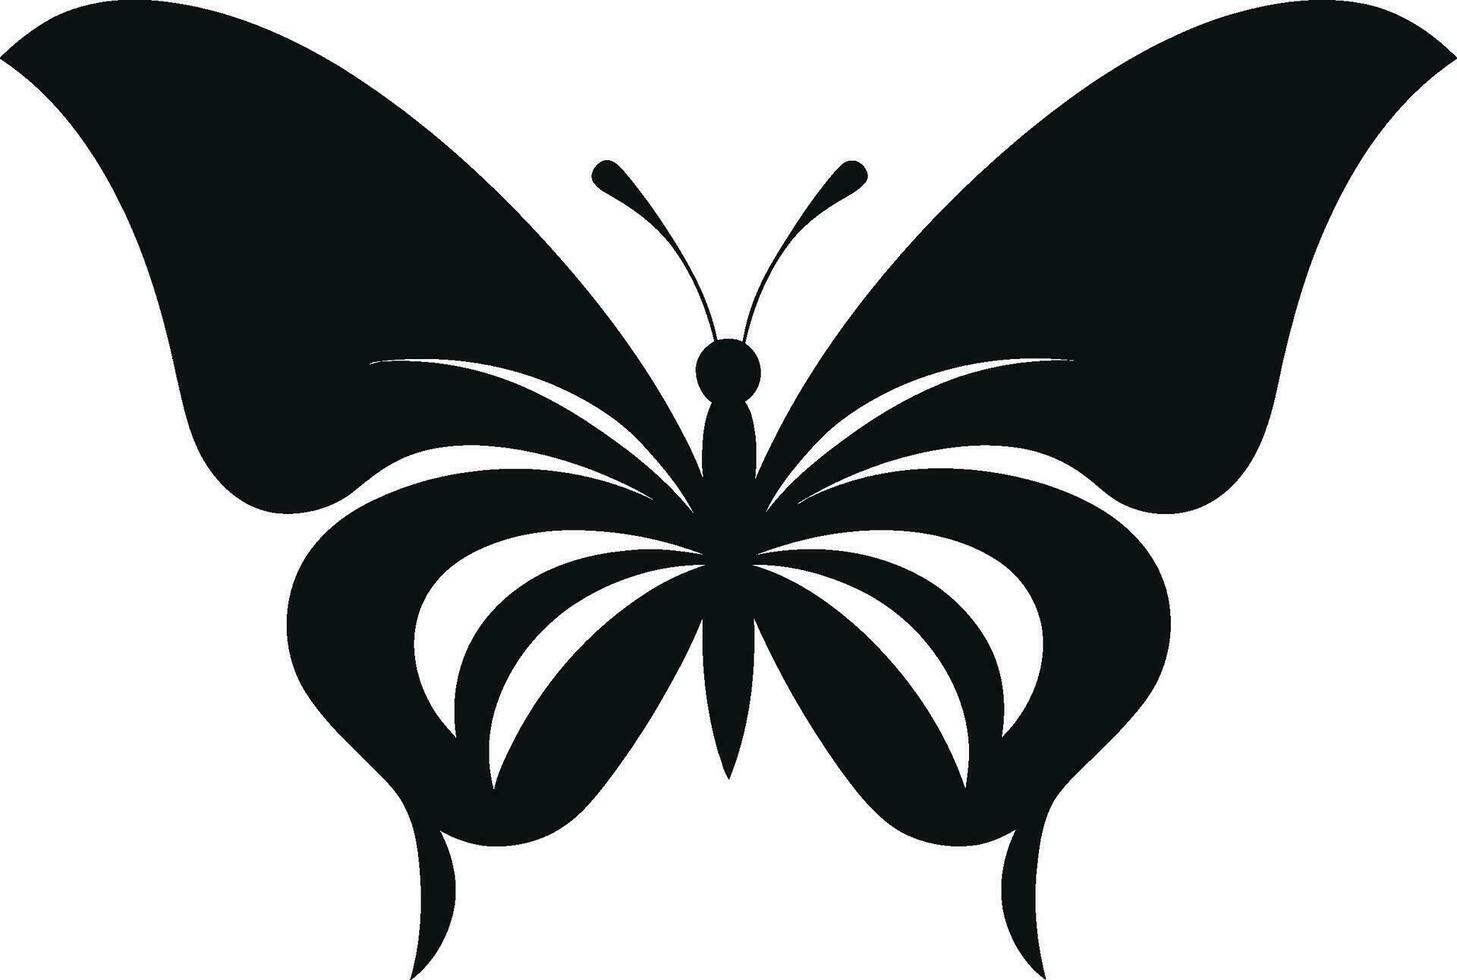 Sculpted Intricacy Butterfly Emblem in Noir Black Butterfly in Shadows A Mark of Intricacy vector